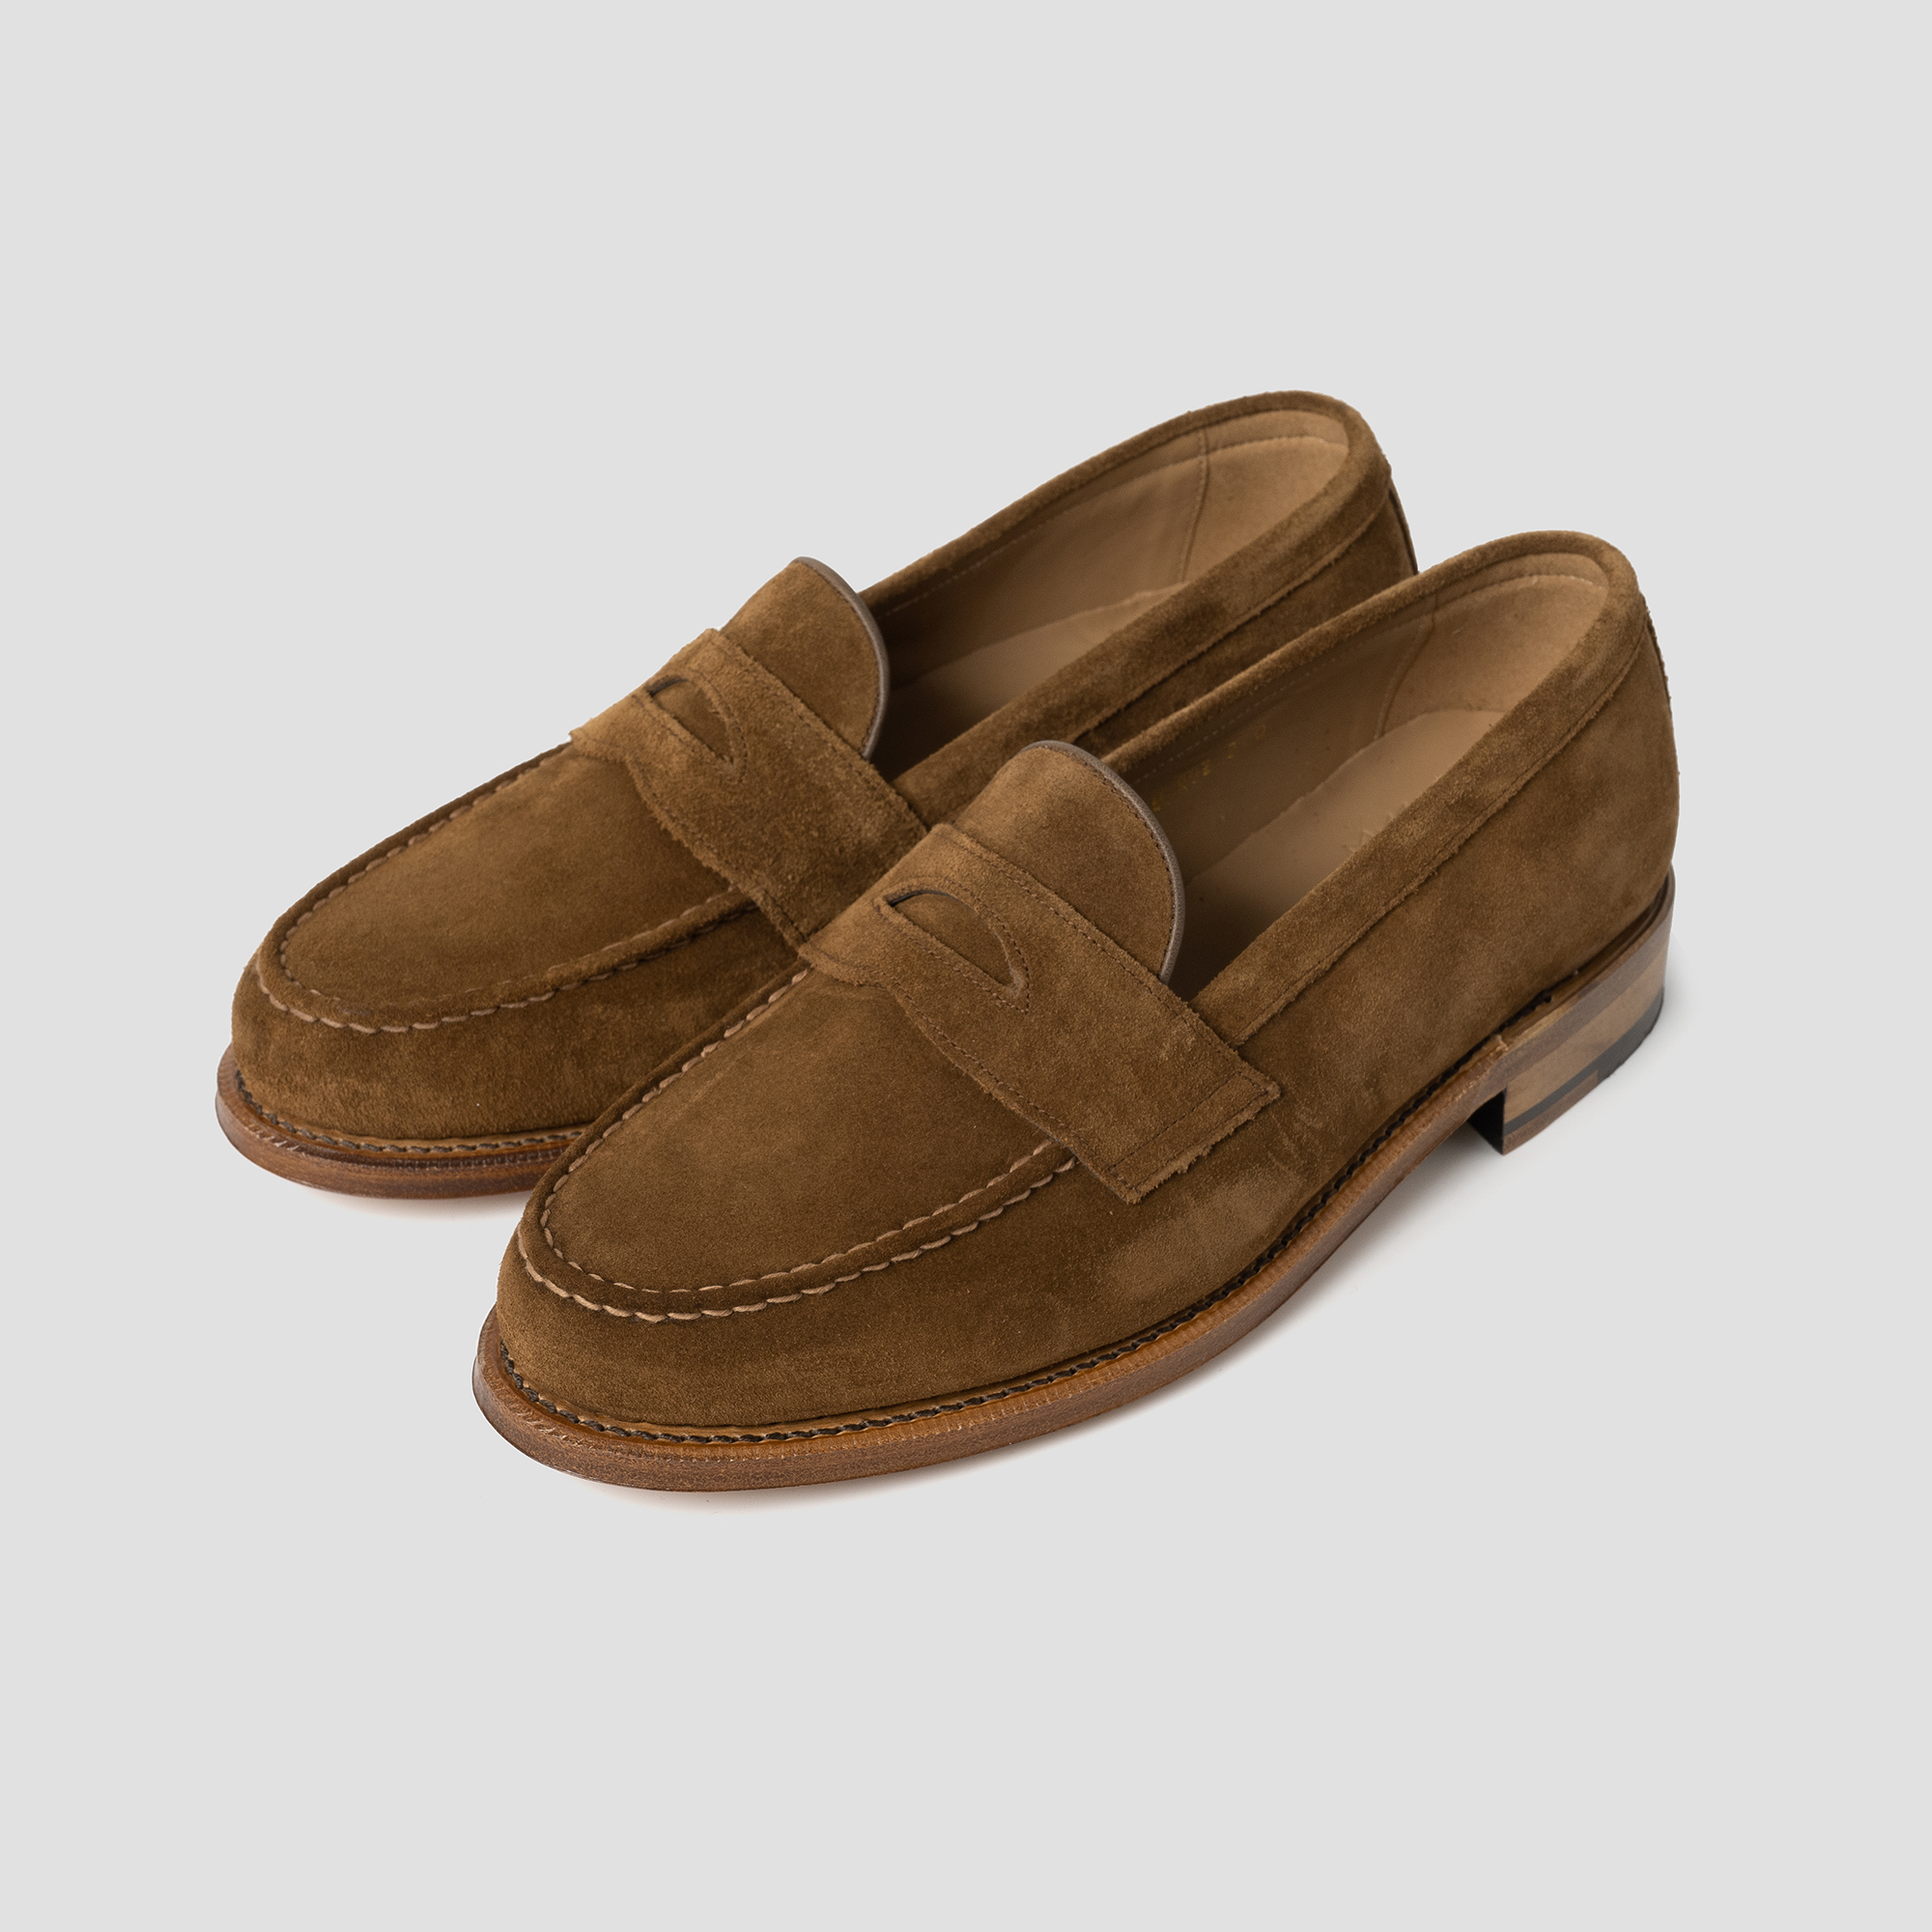 Goodyear Welted Suede Penny Loafer [Brown]미라보로